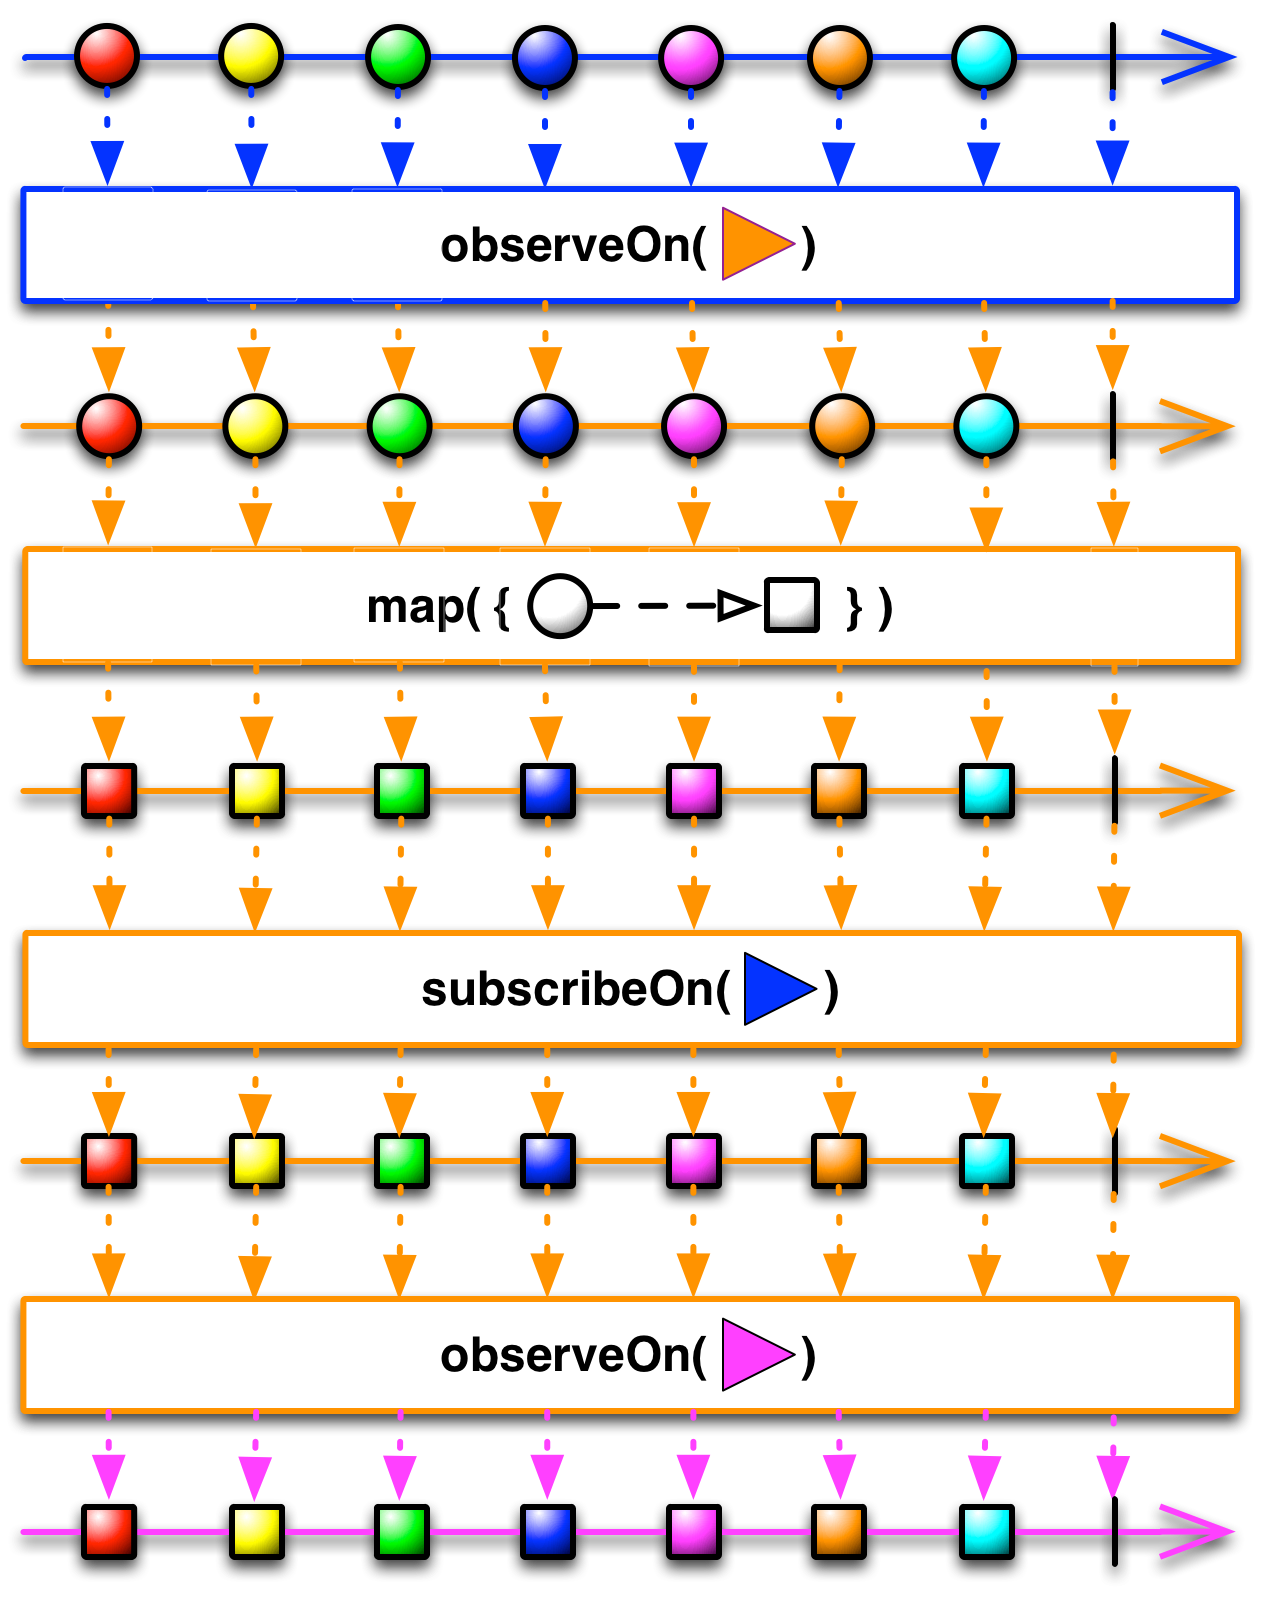 ObserveOn and SubscribeOn